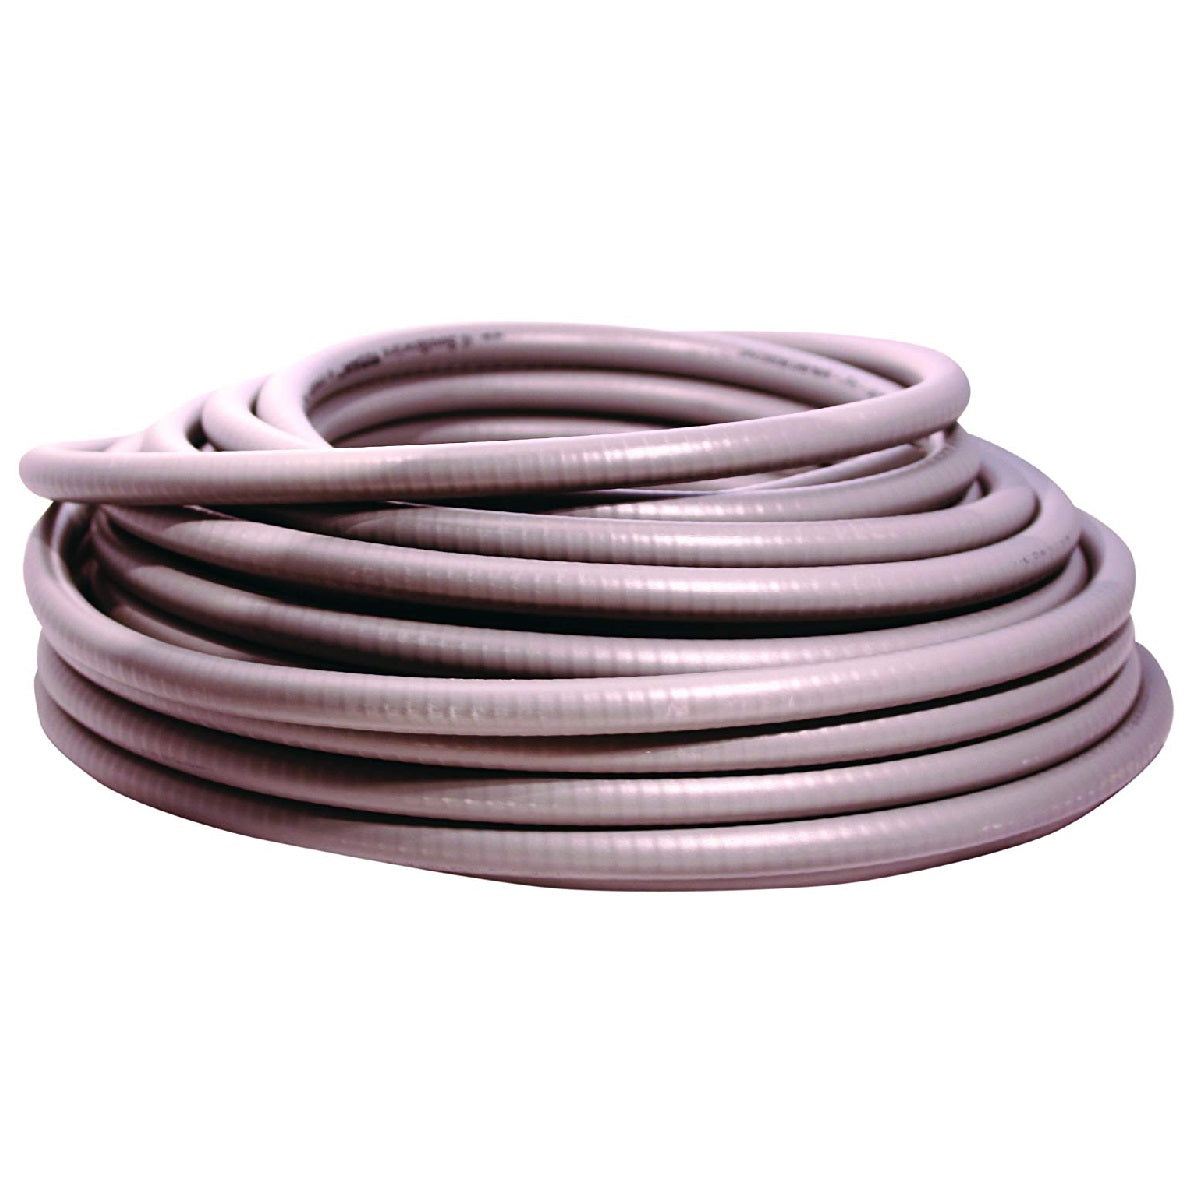 buy rough electrical conduit at cheap rate in bulk. wholesale & retail electrical tools & kits store. home décor ideas, maintenance, repair replacement parts